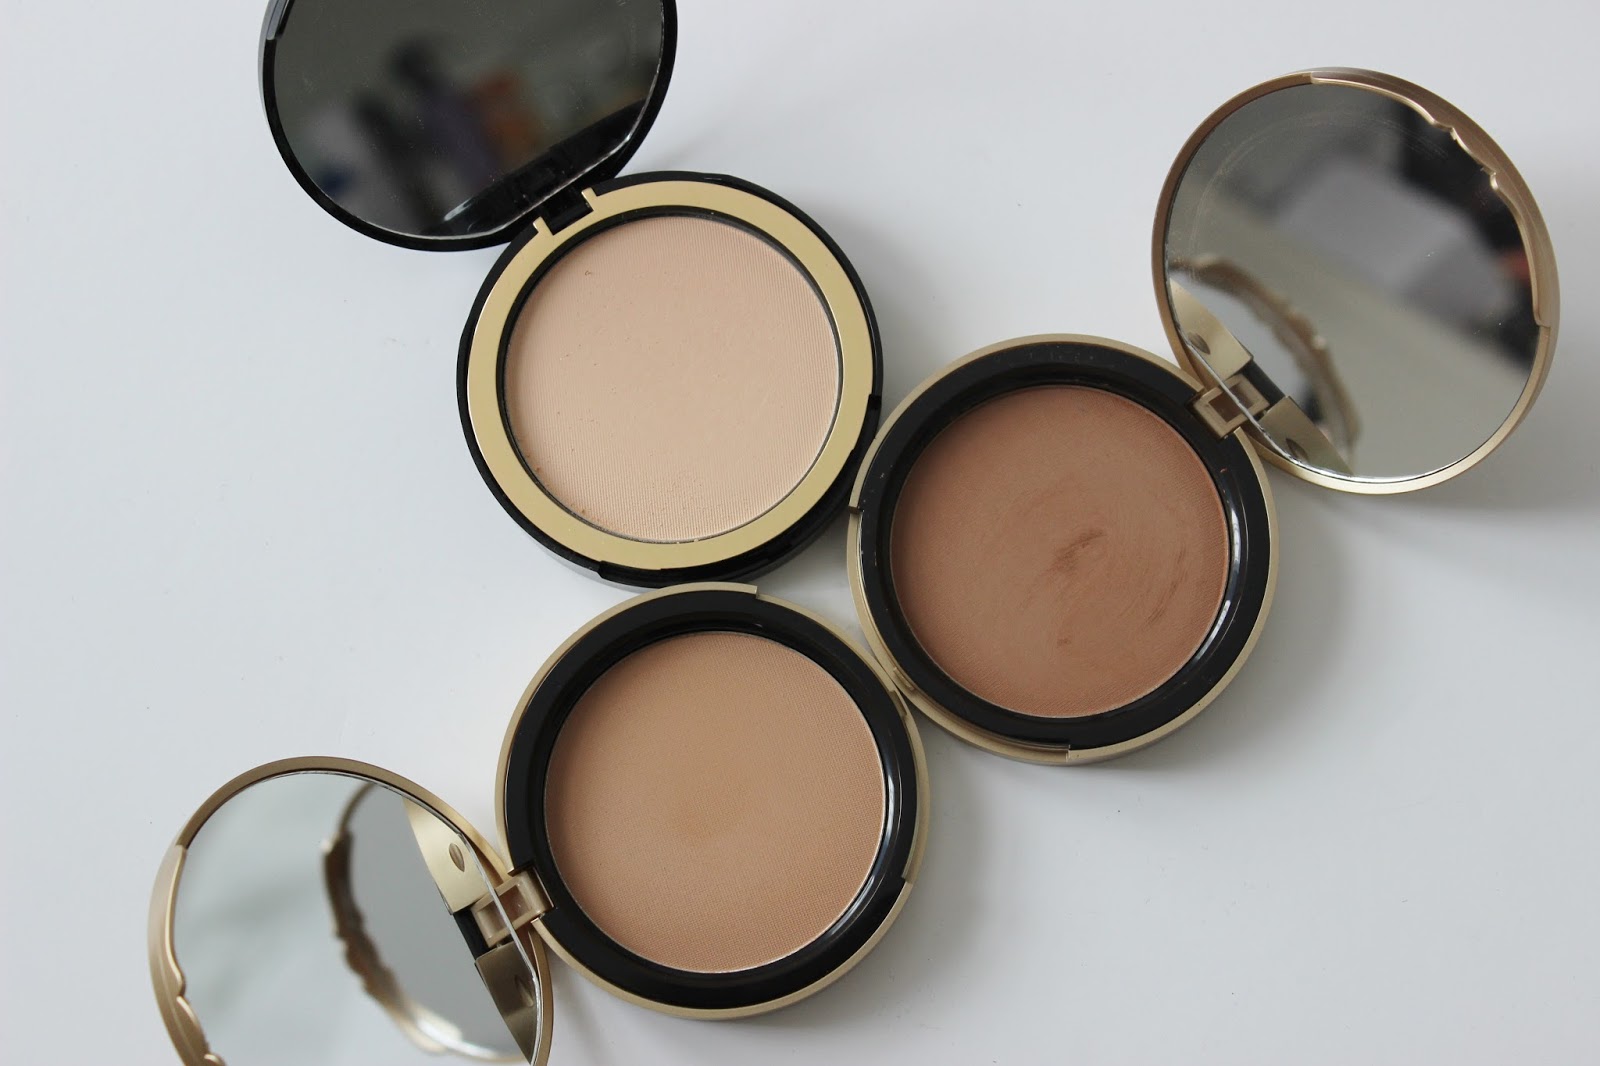 Too Faced Chocolate Soleil Bronzer and Cocoa Powder Foundation review ...